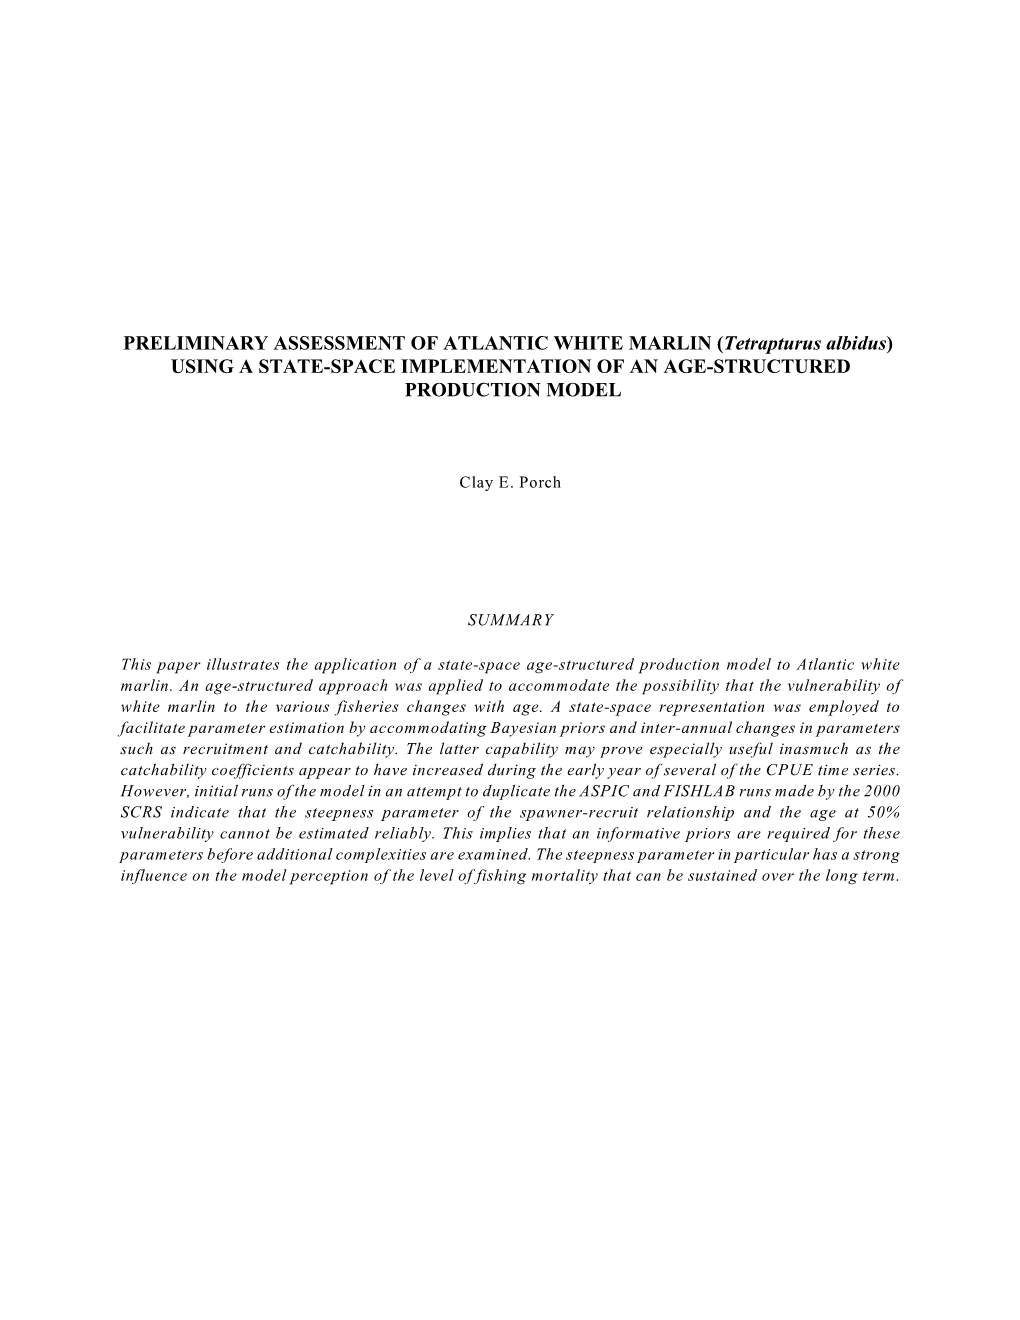 PRELIMINARY ASSESSMENT of ATLANTIC WHITE MARLIN (Tetrapturus Albidus) USING a STATE-SPACE IMPLEMENTATION of an AGE-STRUCTURED PRODUCTION MODEL